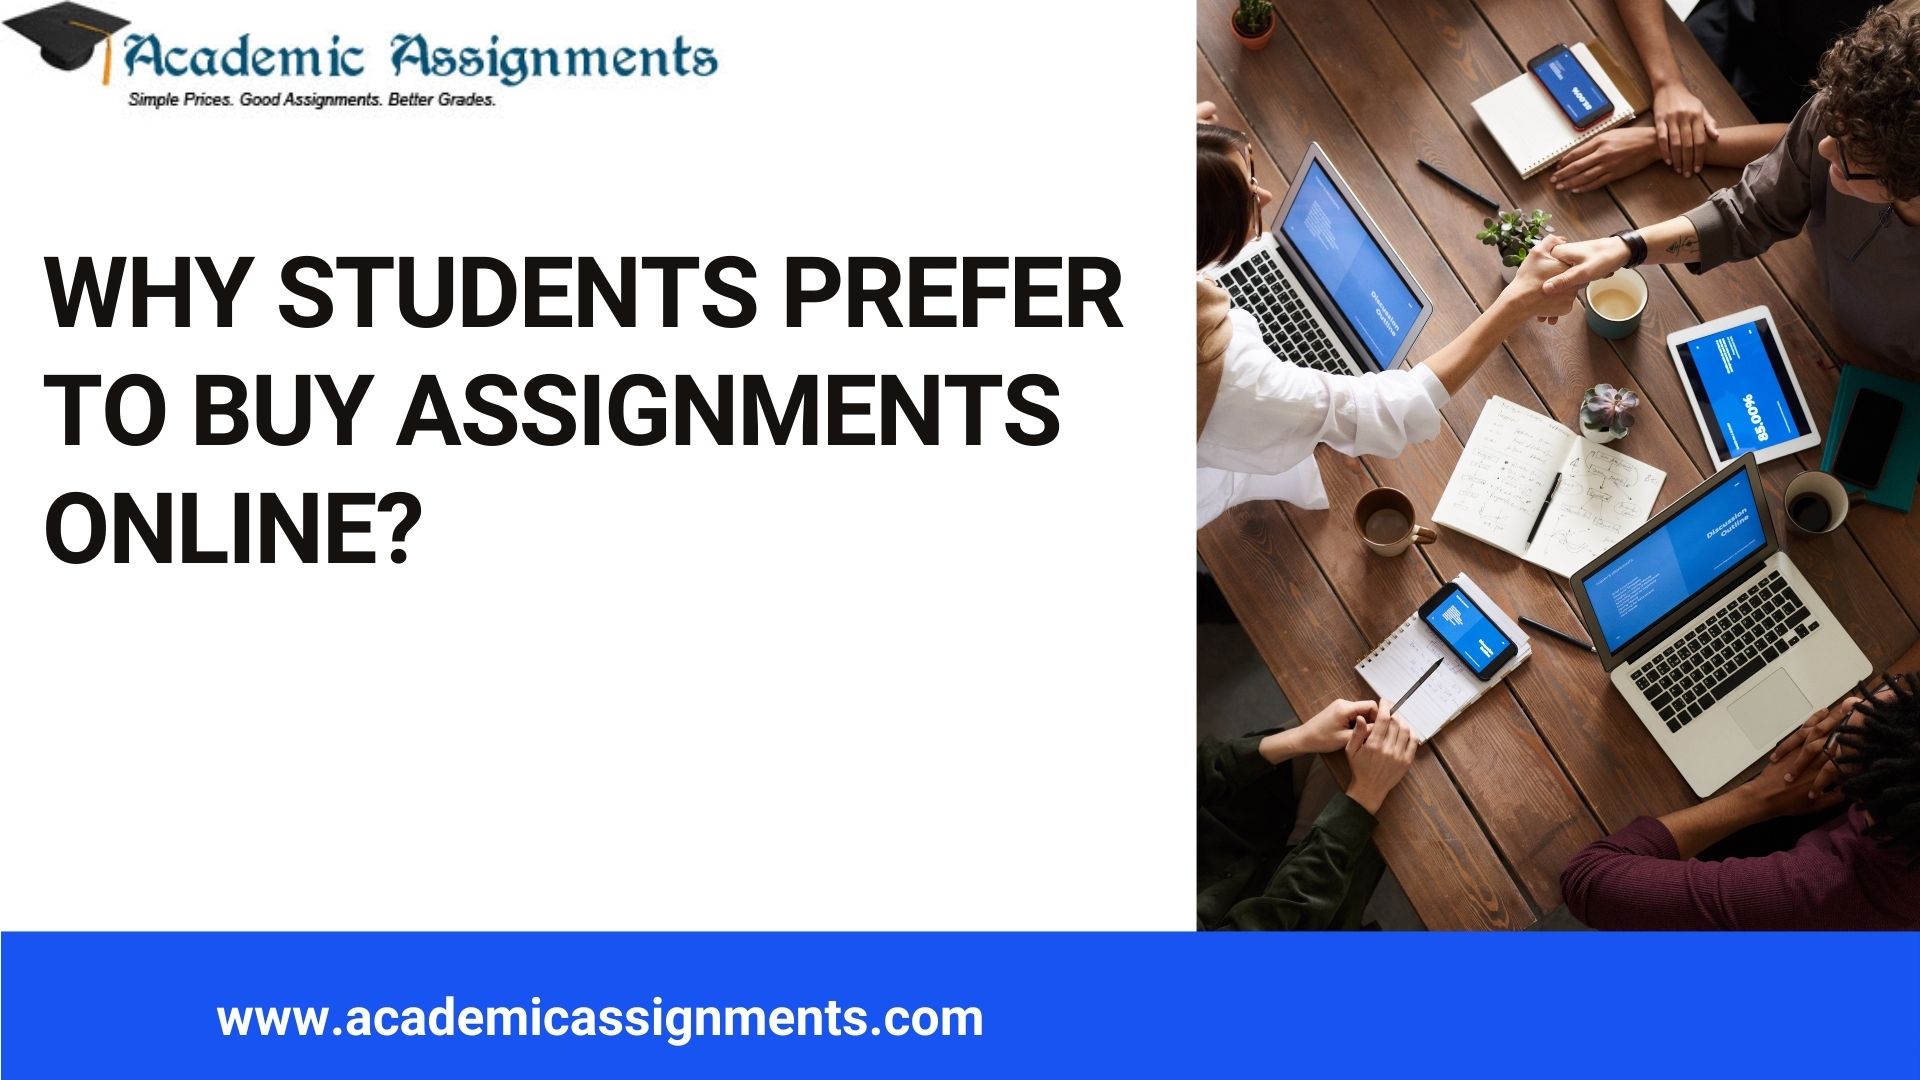 WHY STUDENTS PREFER TO BUY ASSIGNMENTS ONLINE